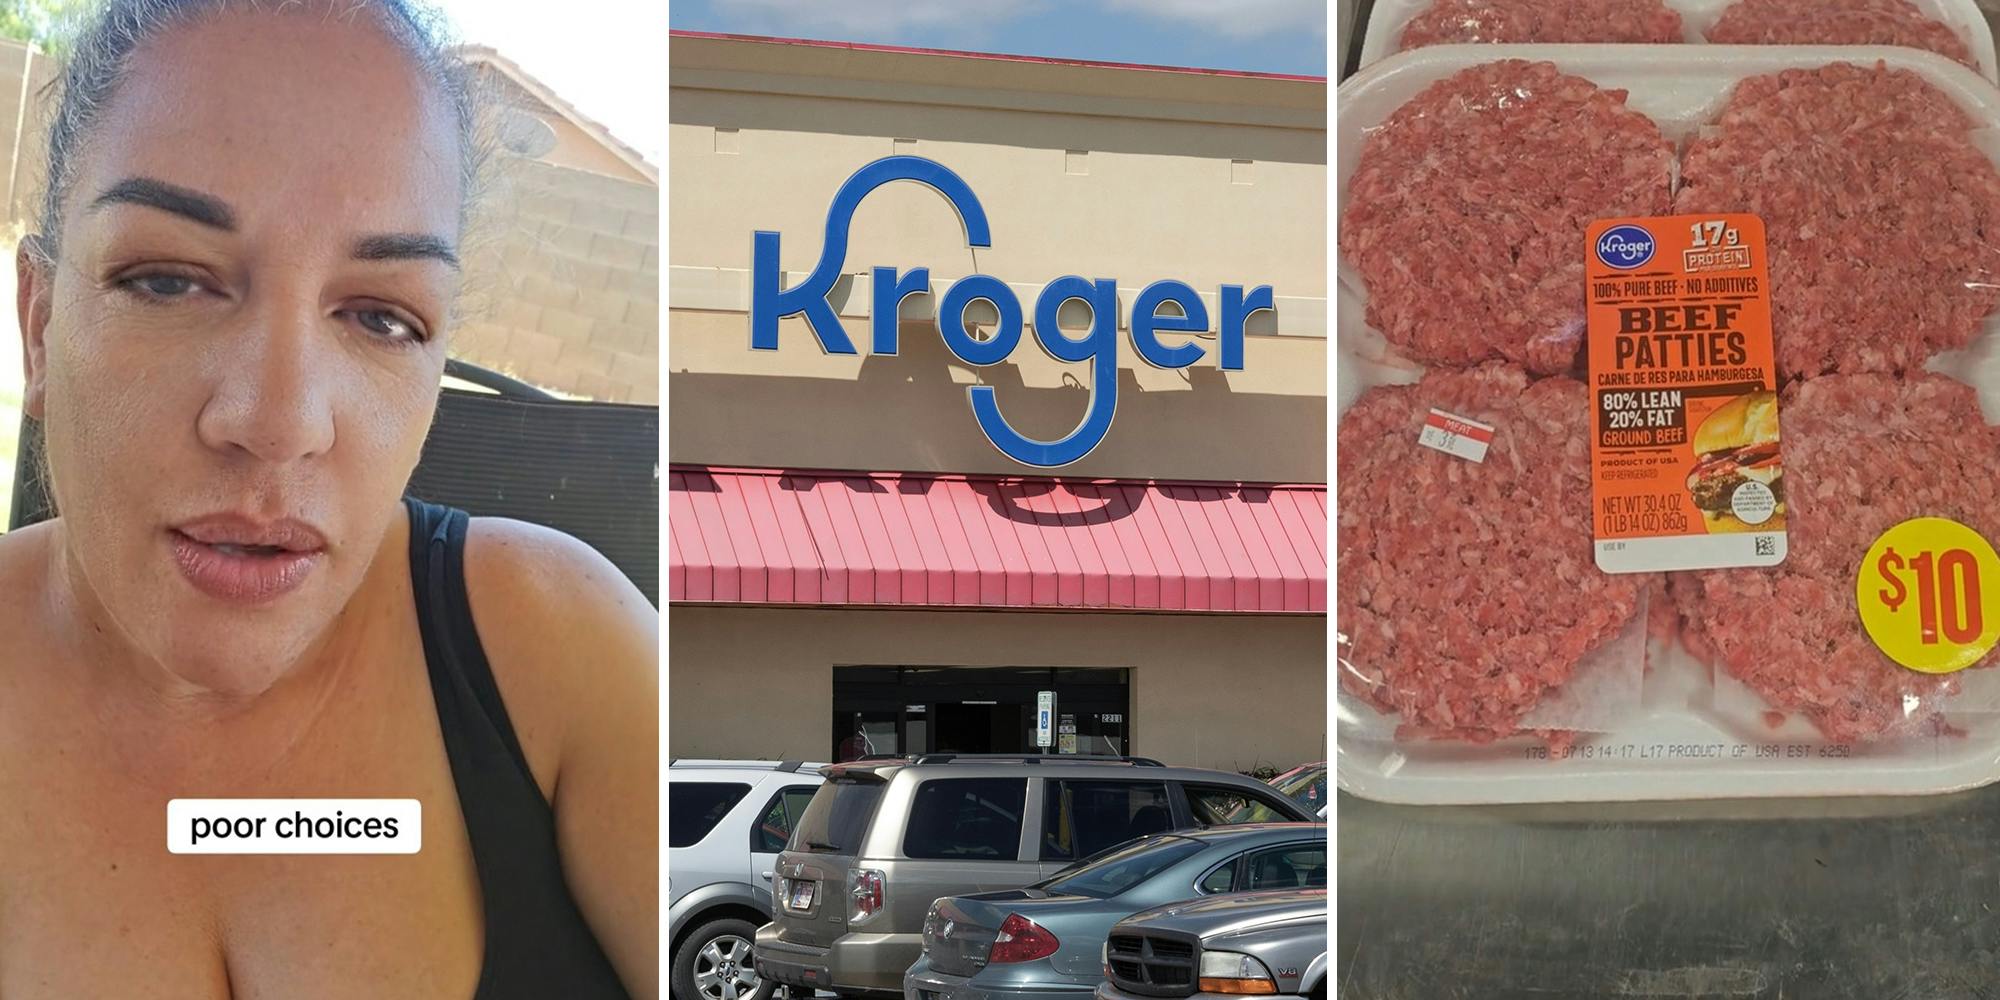 Shopper says Kroger’s $10 for 80% lean patties are bamboozling us